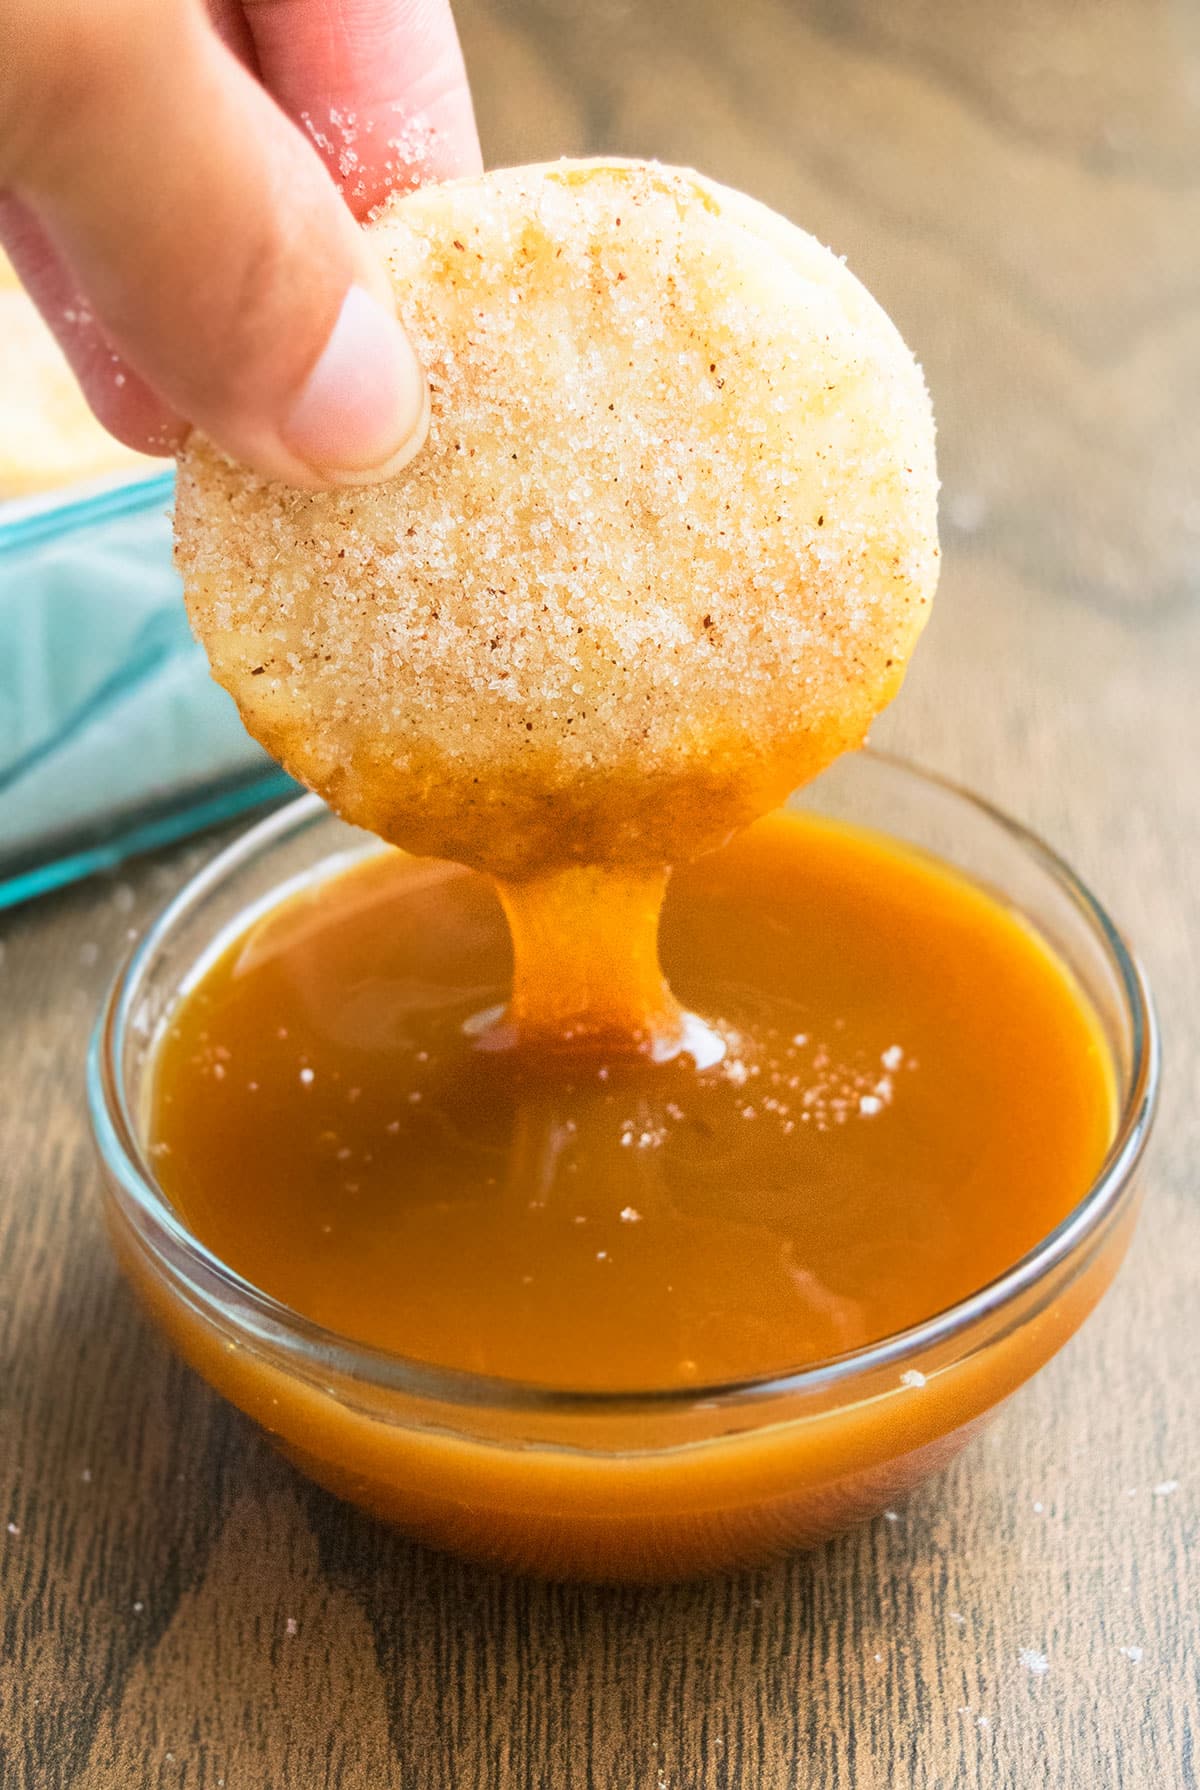 Cinnamon Spiced Pie Crust Cookies Being Dipped in a Bowl of Caramel Sauce